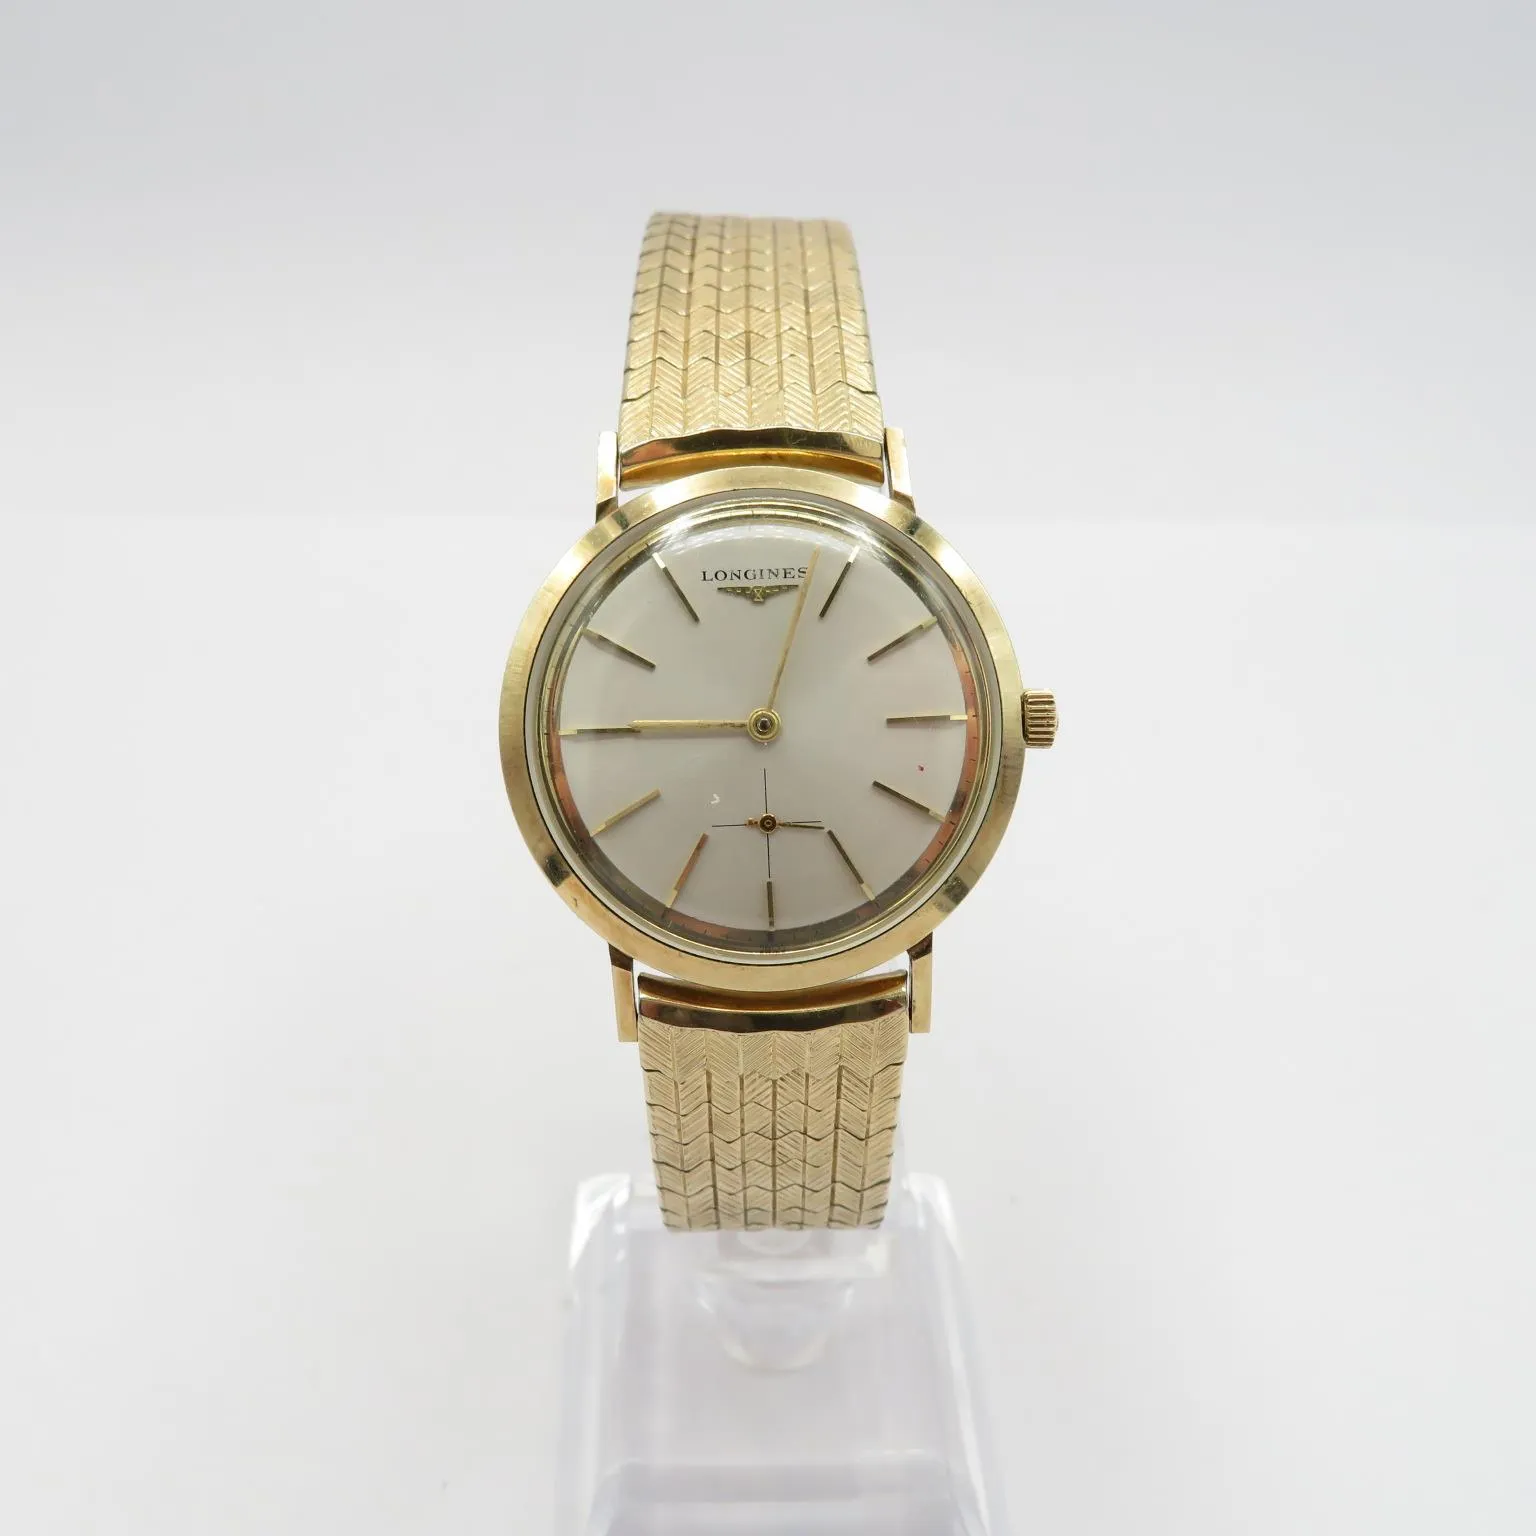 Longines 1200 Gold-filled